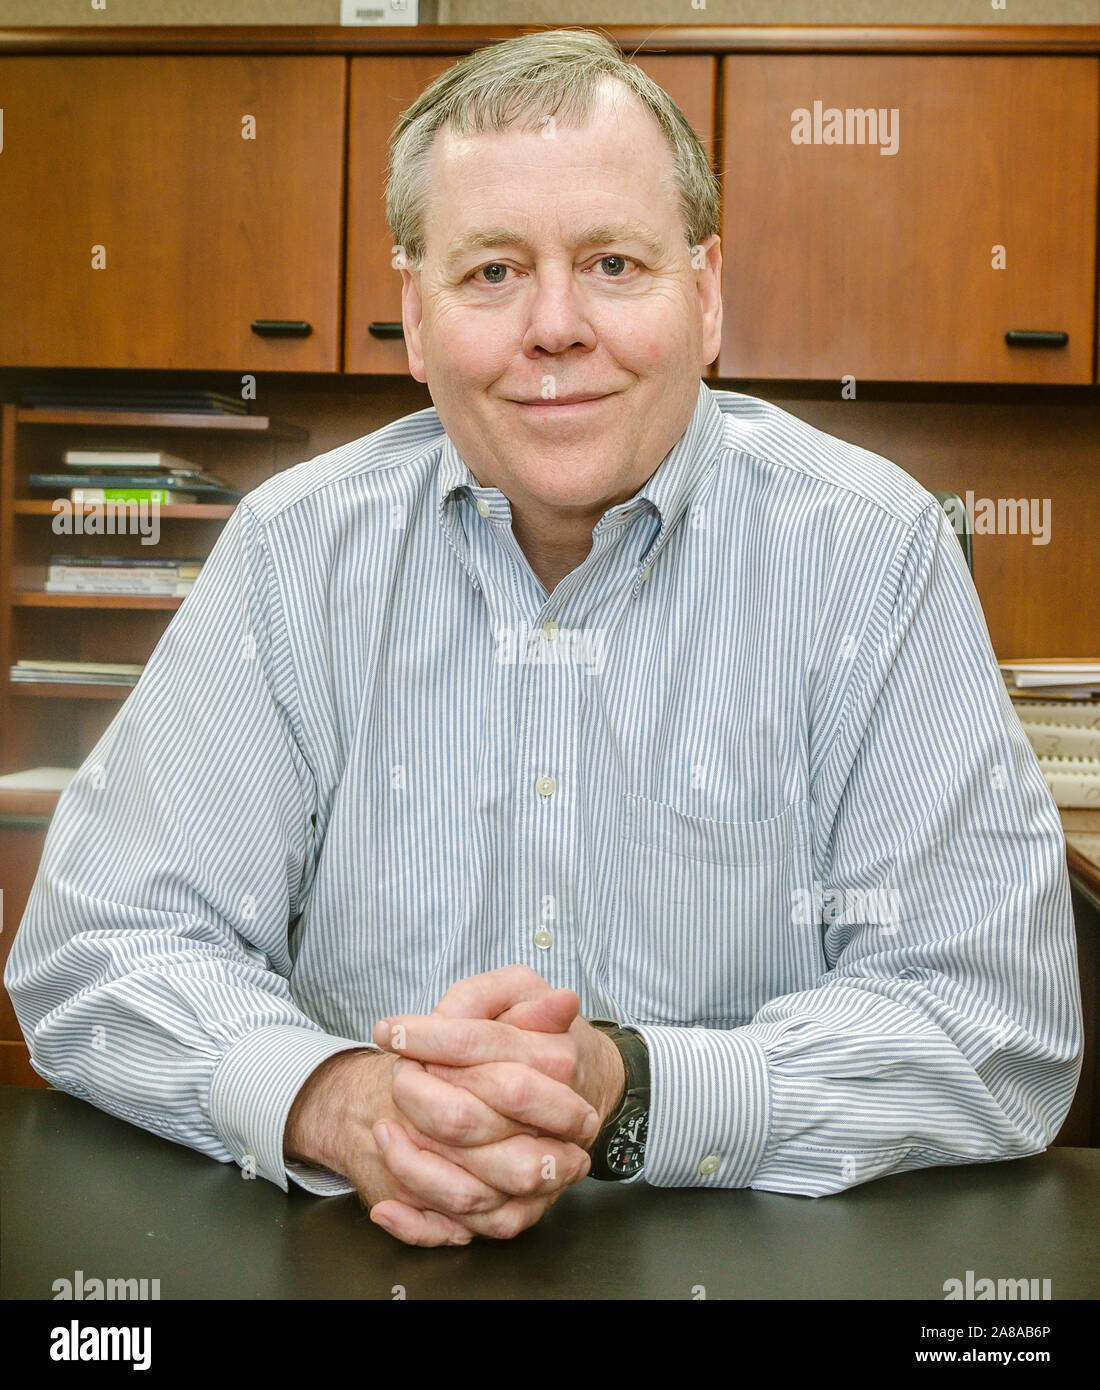 Mark Bostick, president of Comcar Industries, is pictured at the company headquarters, April 16, 2015, in Auburndale, Florida. Stock Photo